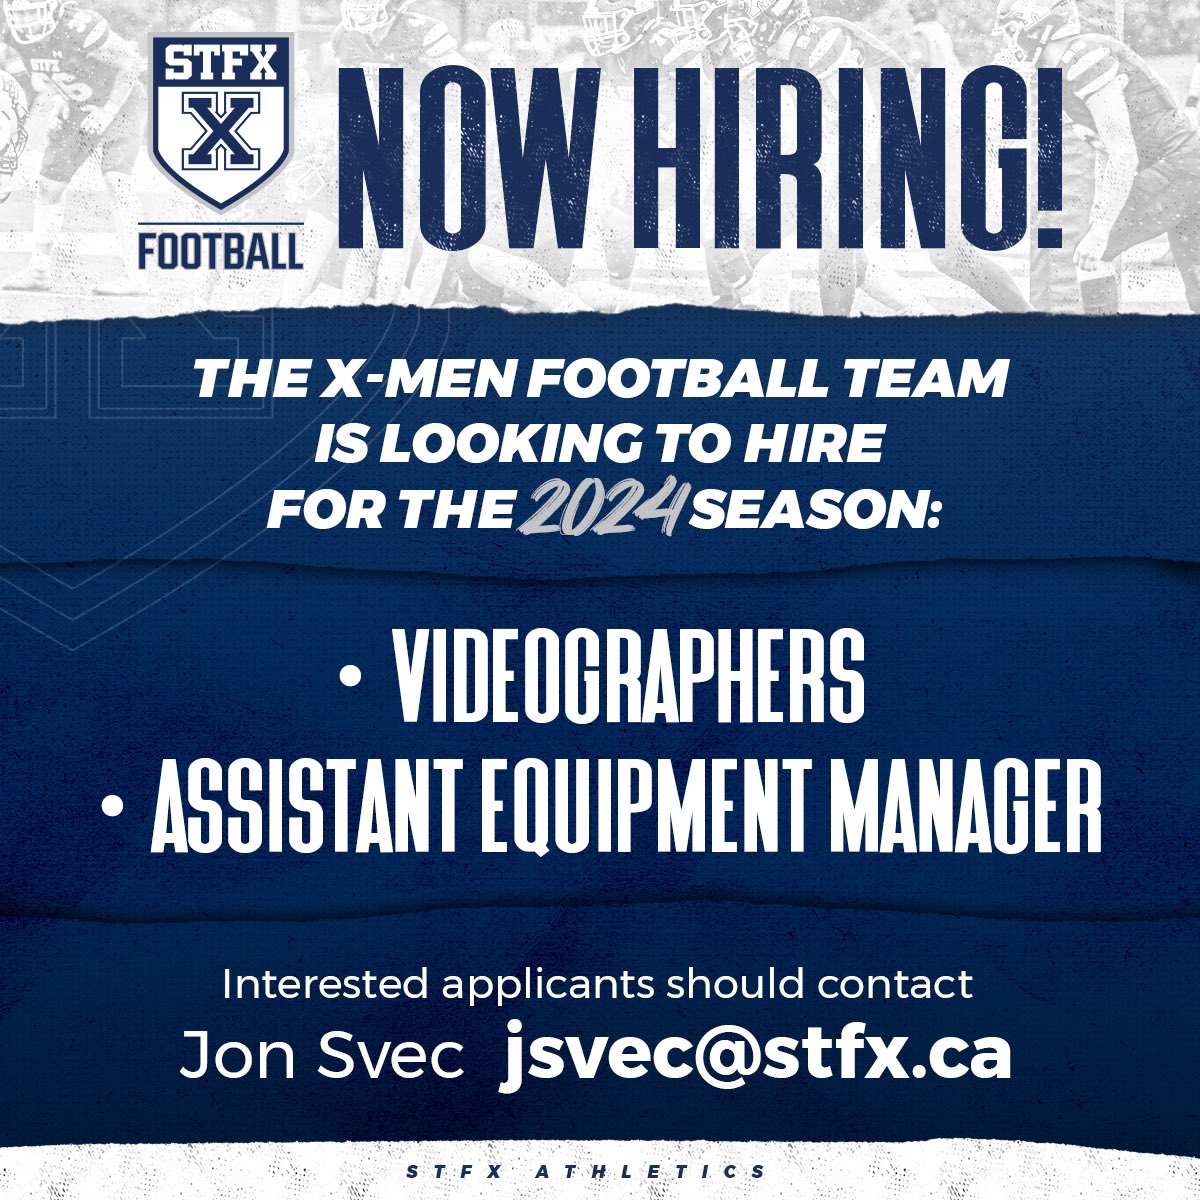 Interested in working with the X-Men Football team for the 2024 season? We are looking to hire Videographers and an Assistant Equipment Manager. For details email jsvec@stfx.ca